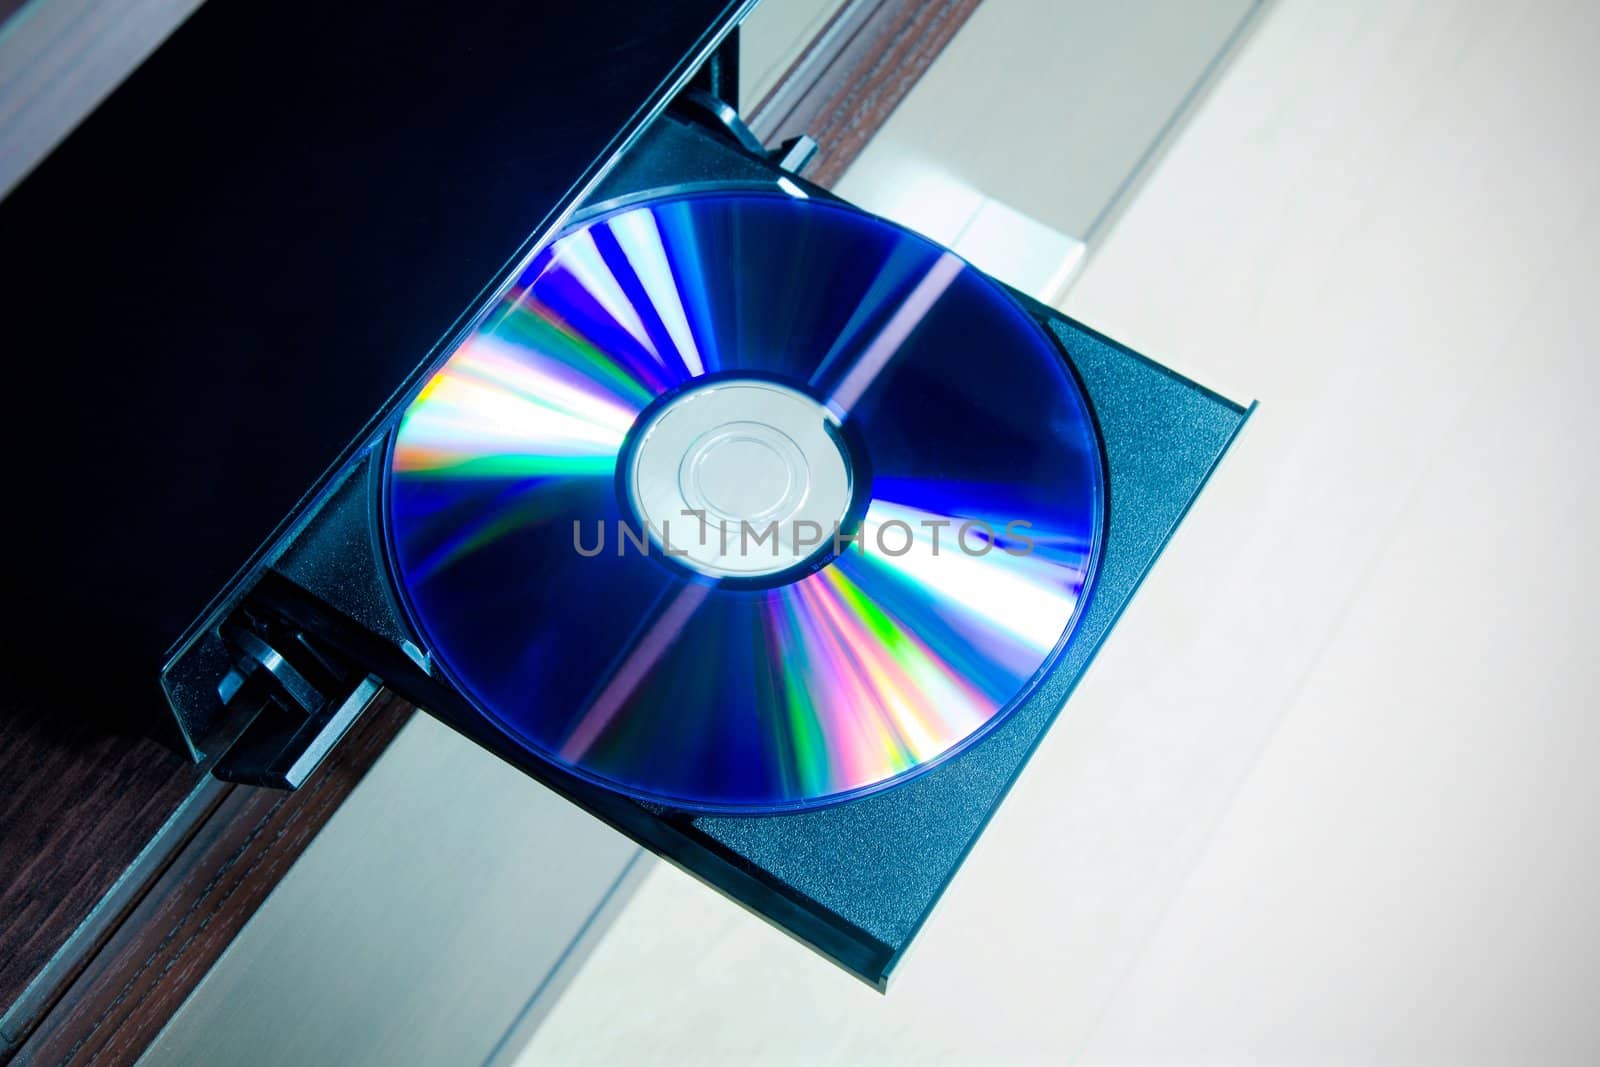 Disc insterted to DVD or CD player by simpson33